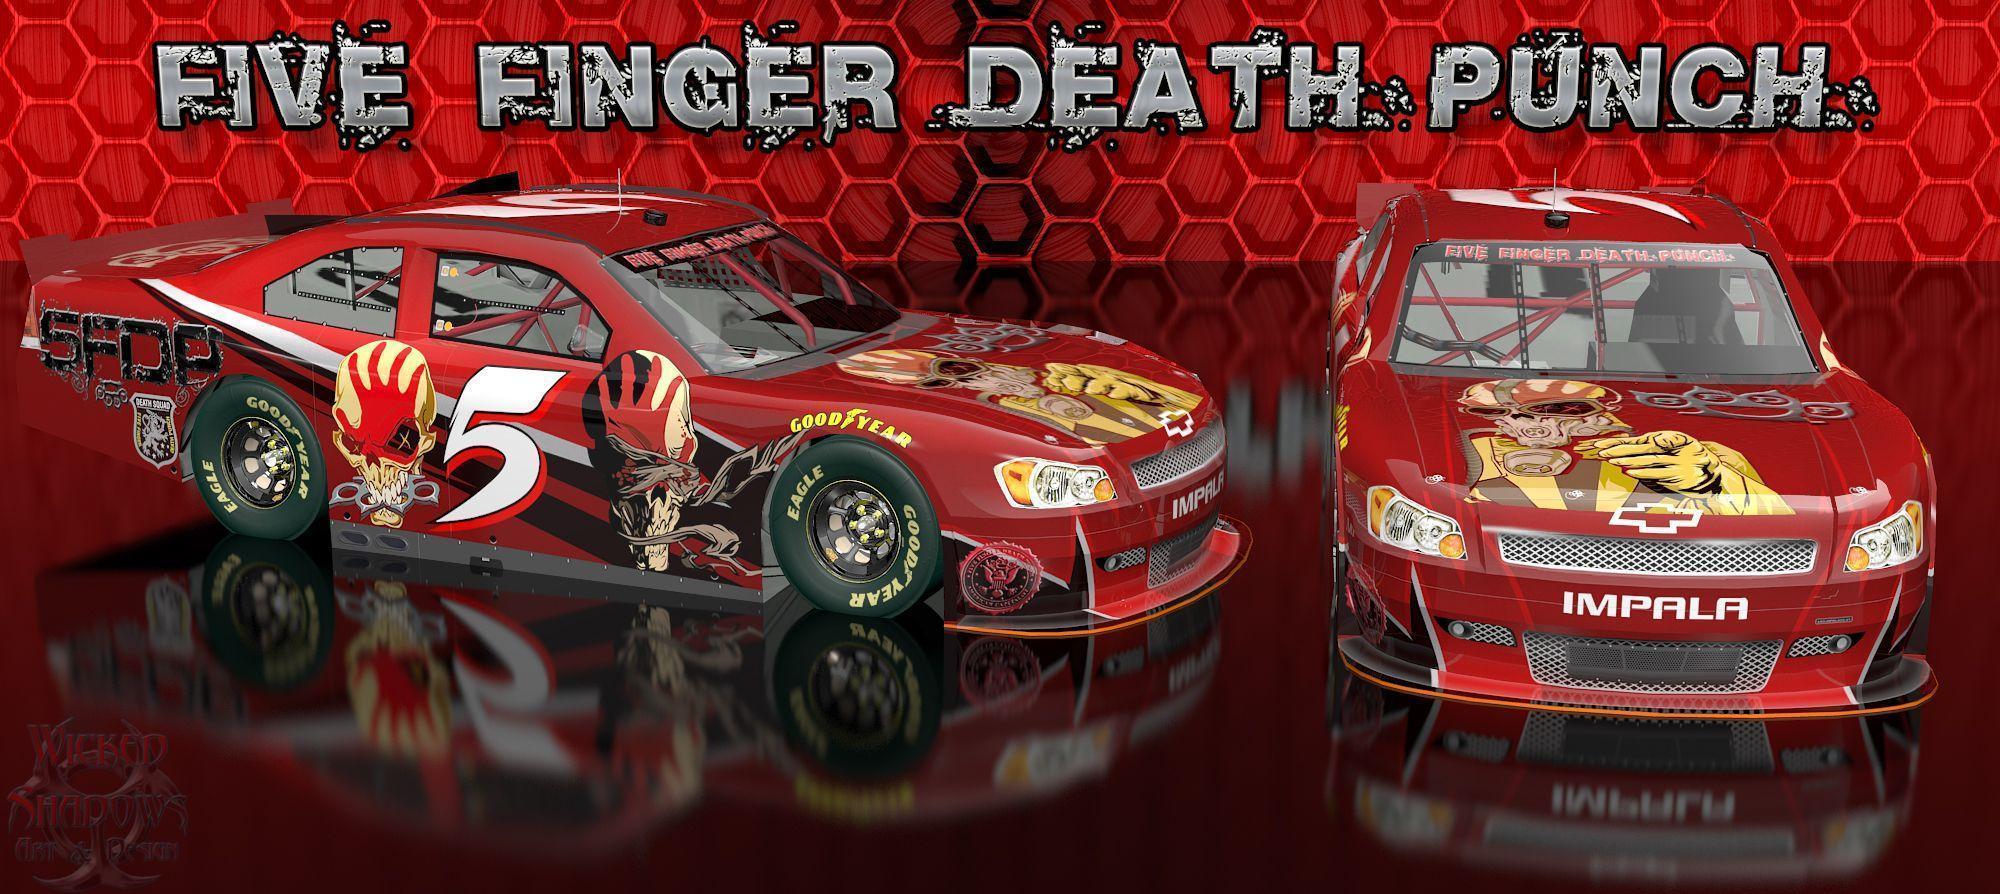 Wallpaper By Wicked Shadows: Five Finger Death Punch Wicked Chevy